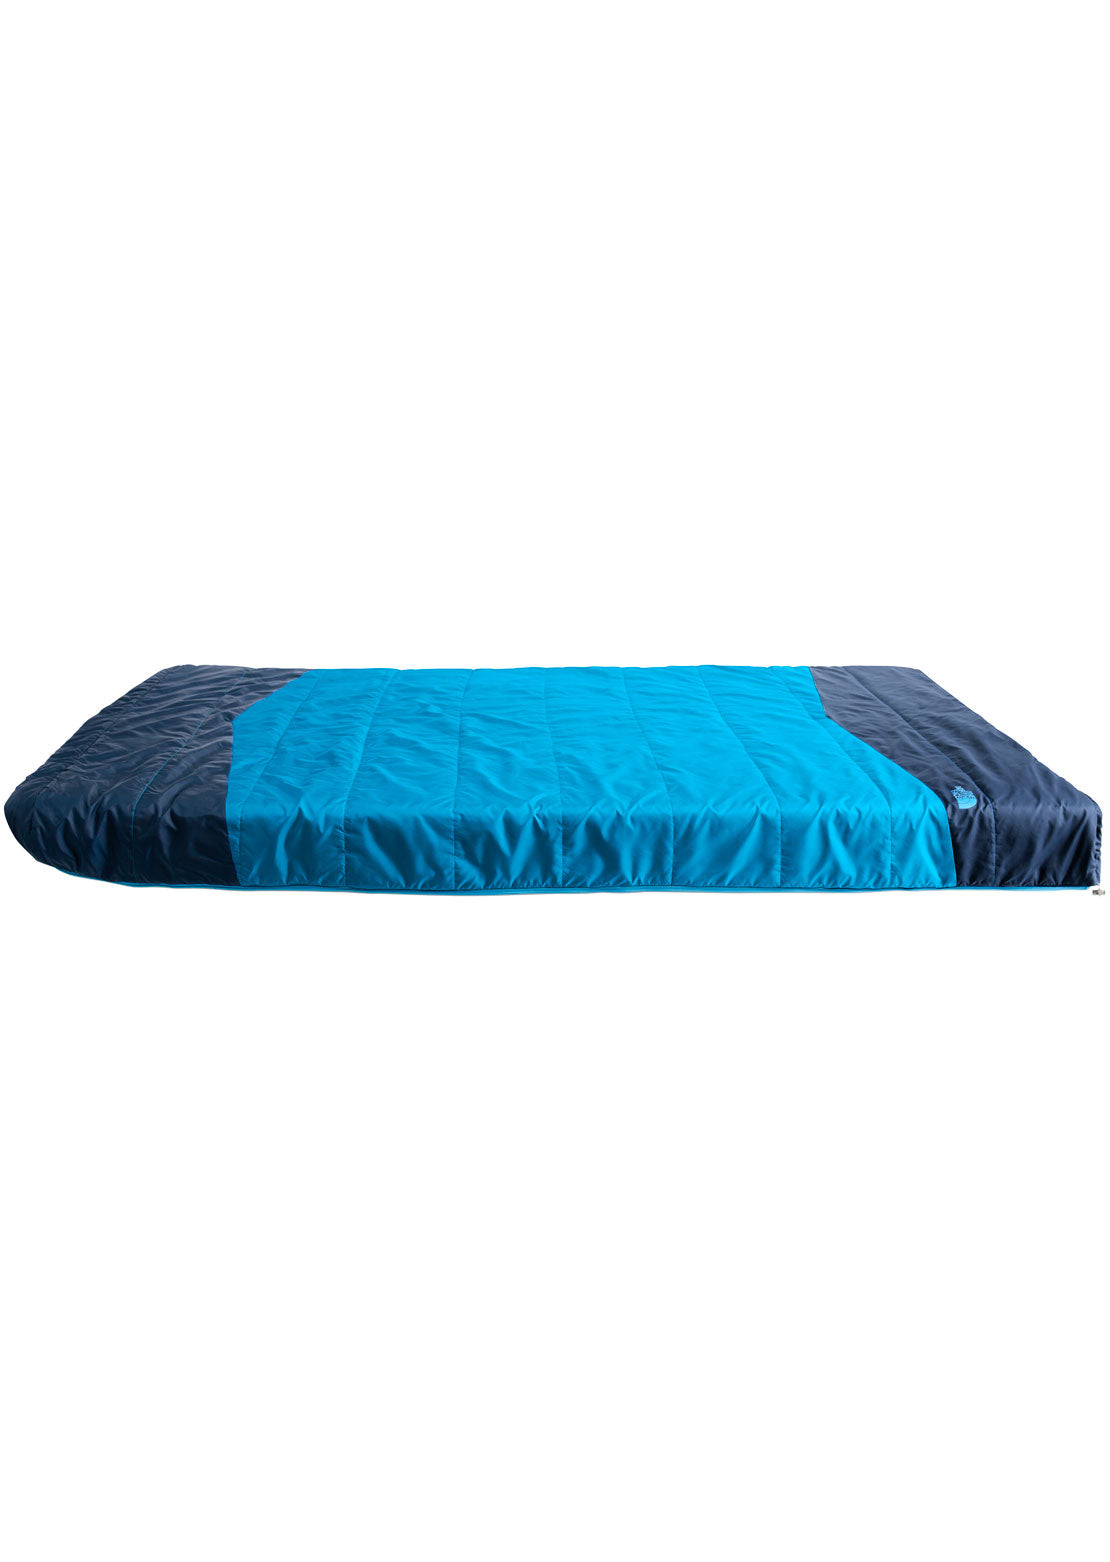 The North Face Dolomite One Double Sleeping Bag Hyper Blue/Radiant Yellow